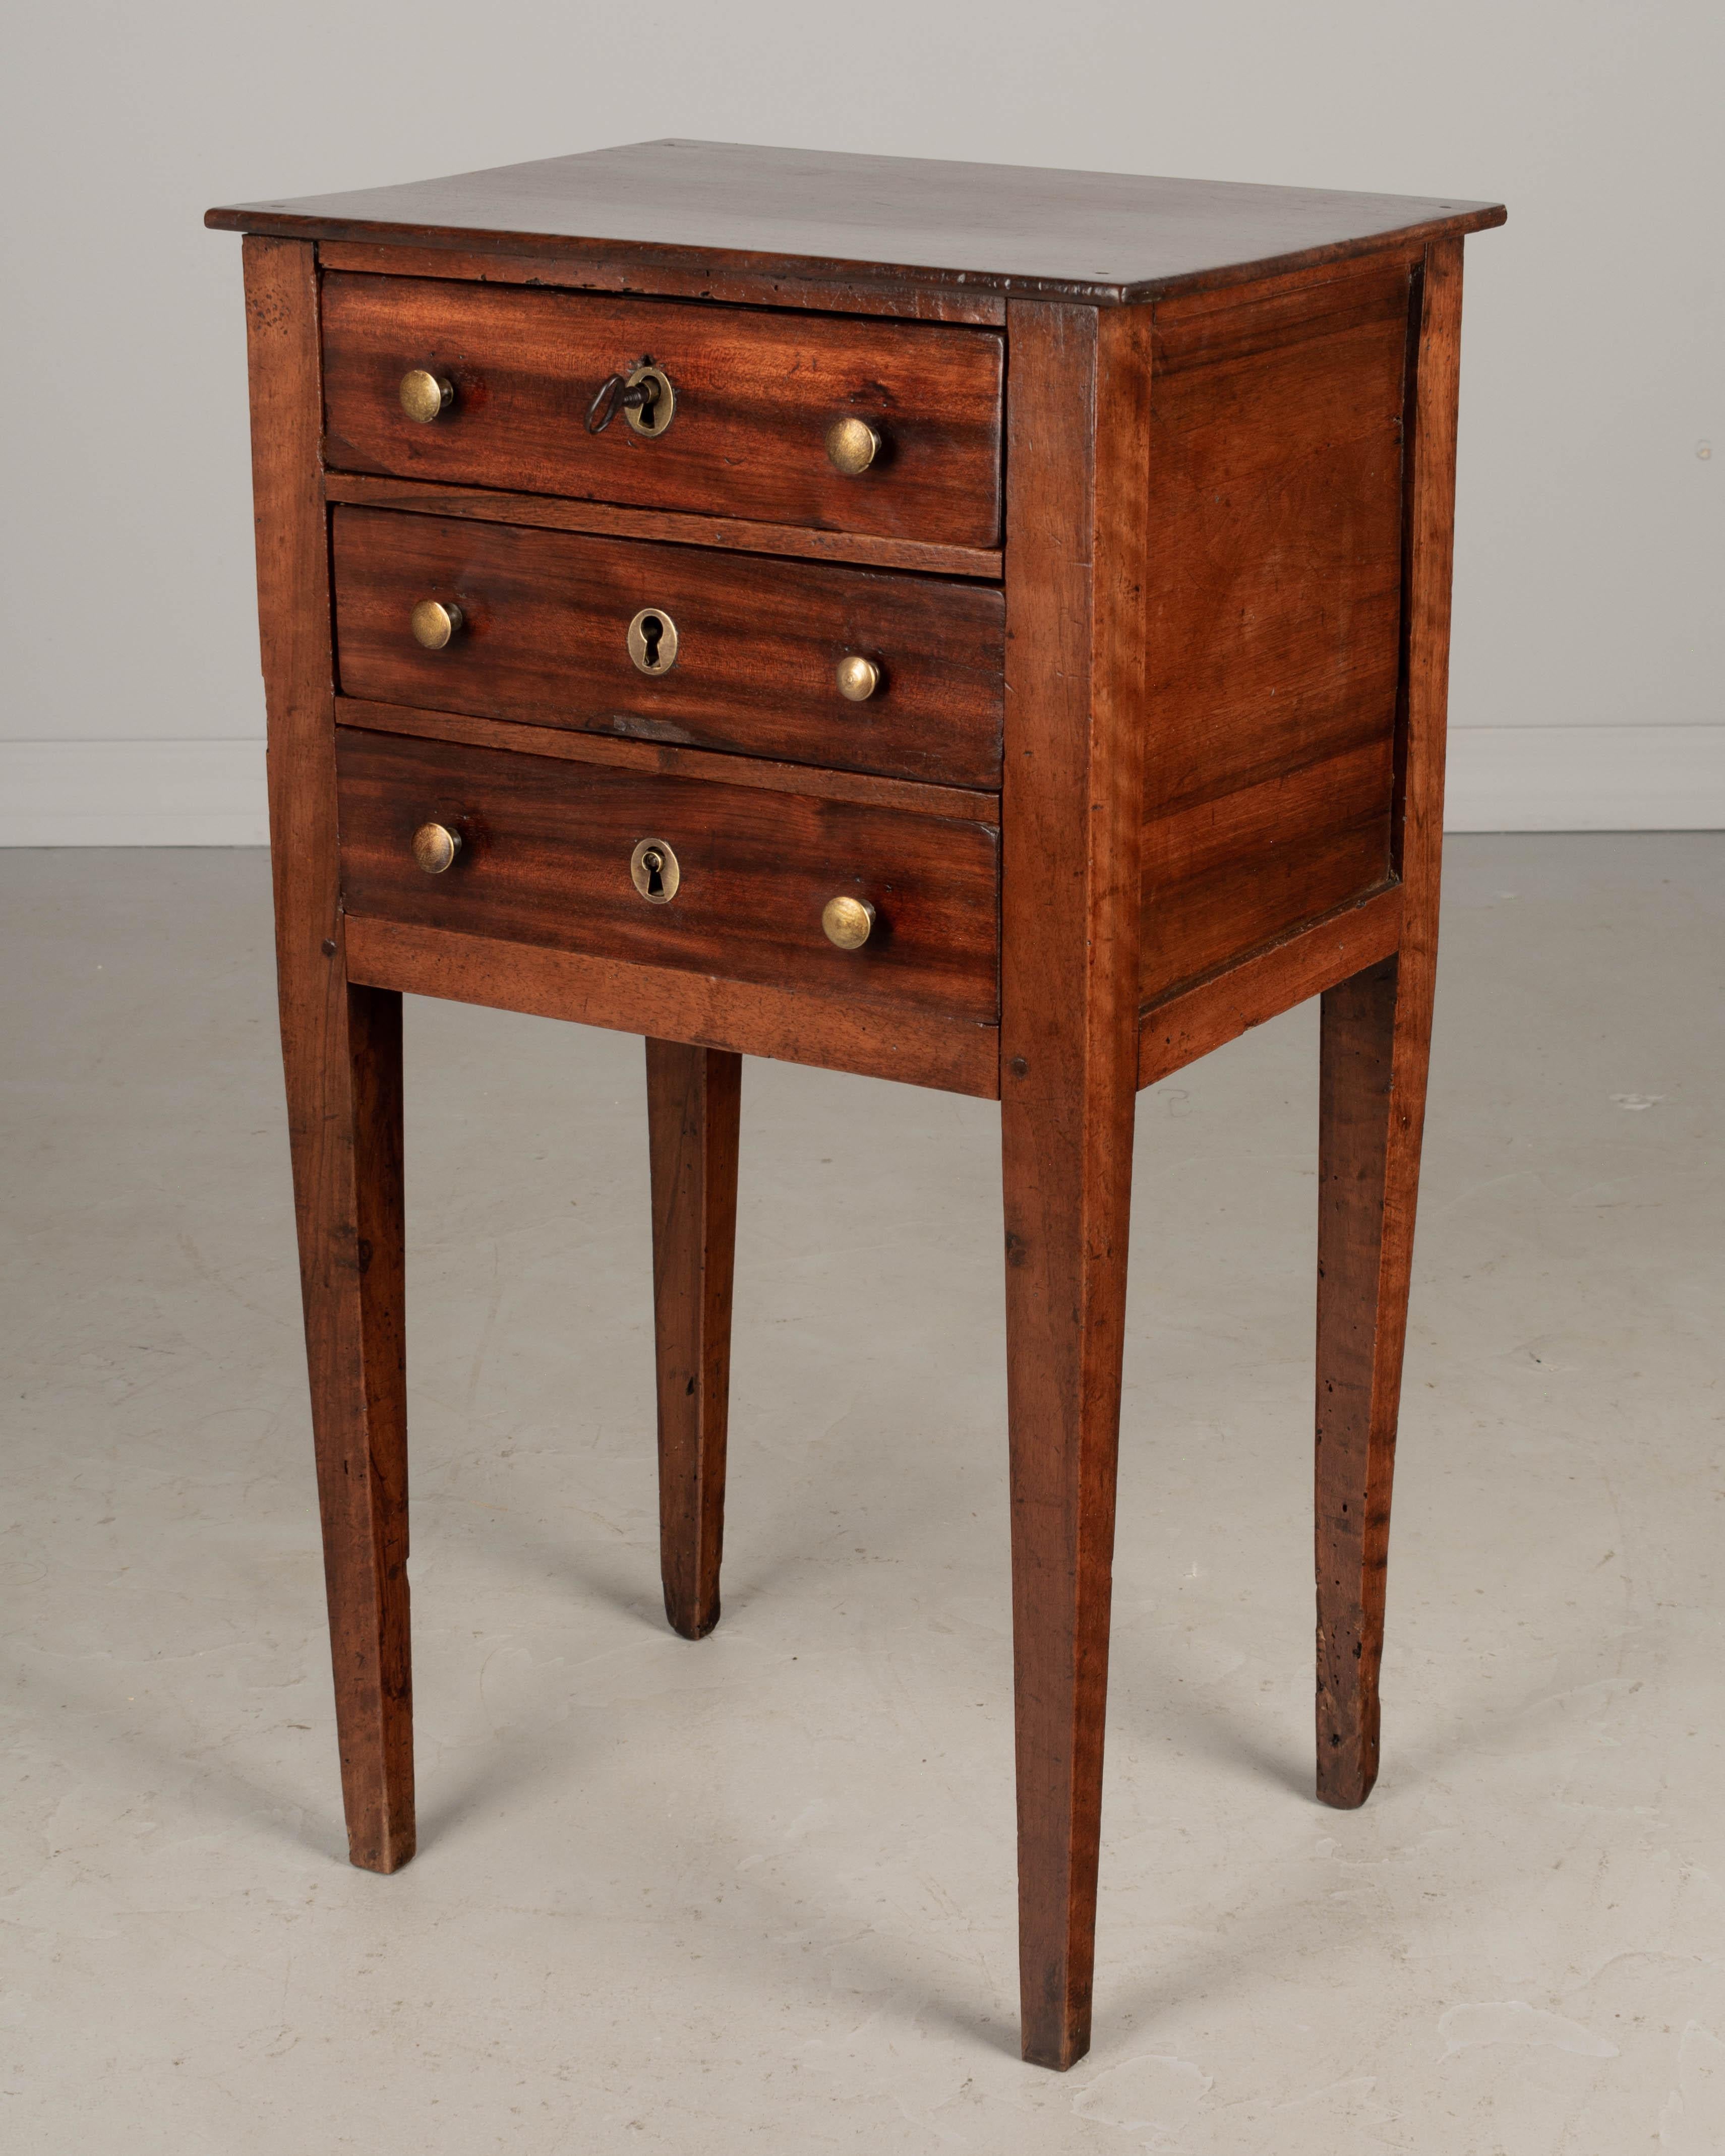 Hand-Crafted 19th Century Country French Walnut Side Table